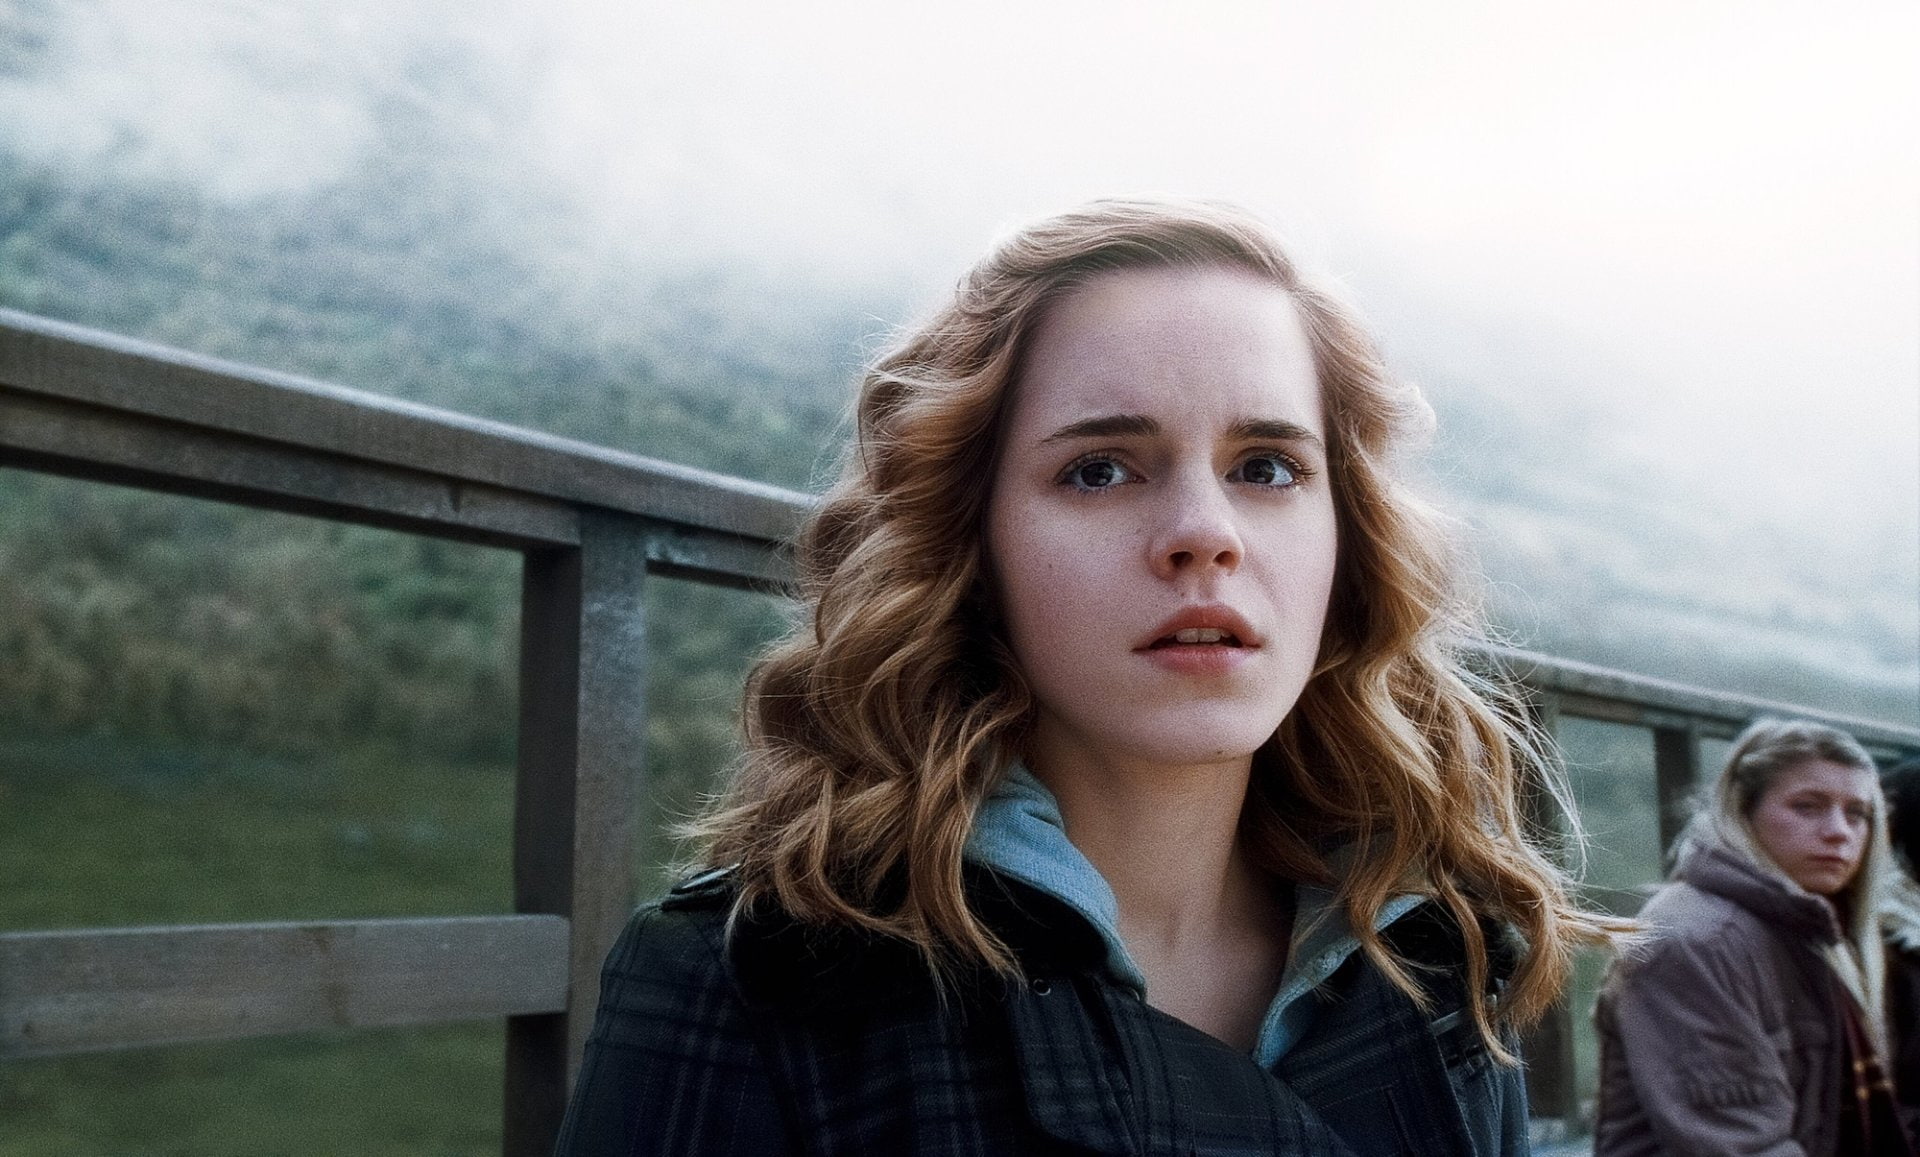 Harry Potter, Harry Potter and the Half-Blood Prince, Hermione Granger